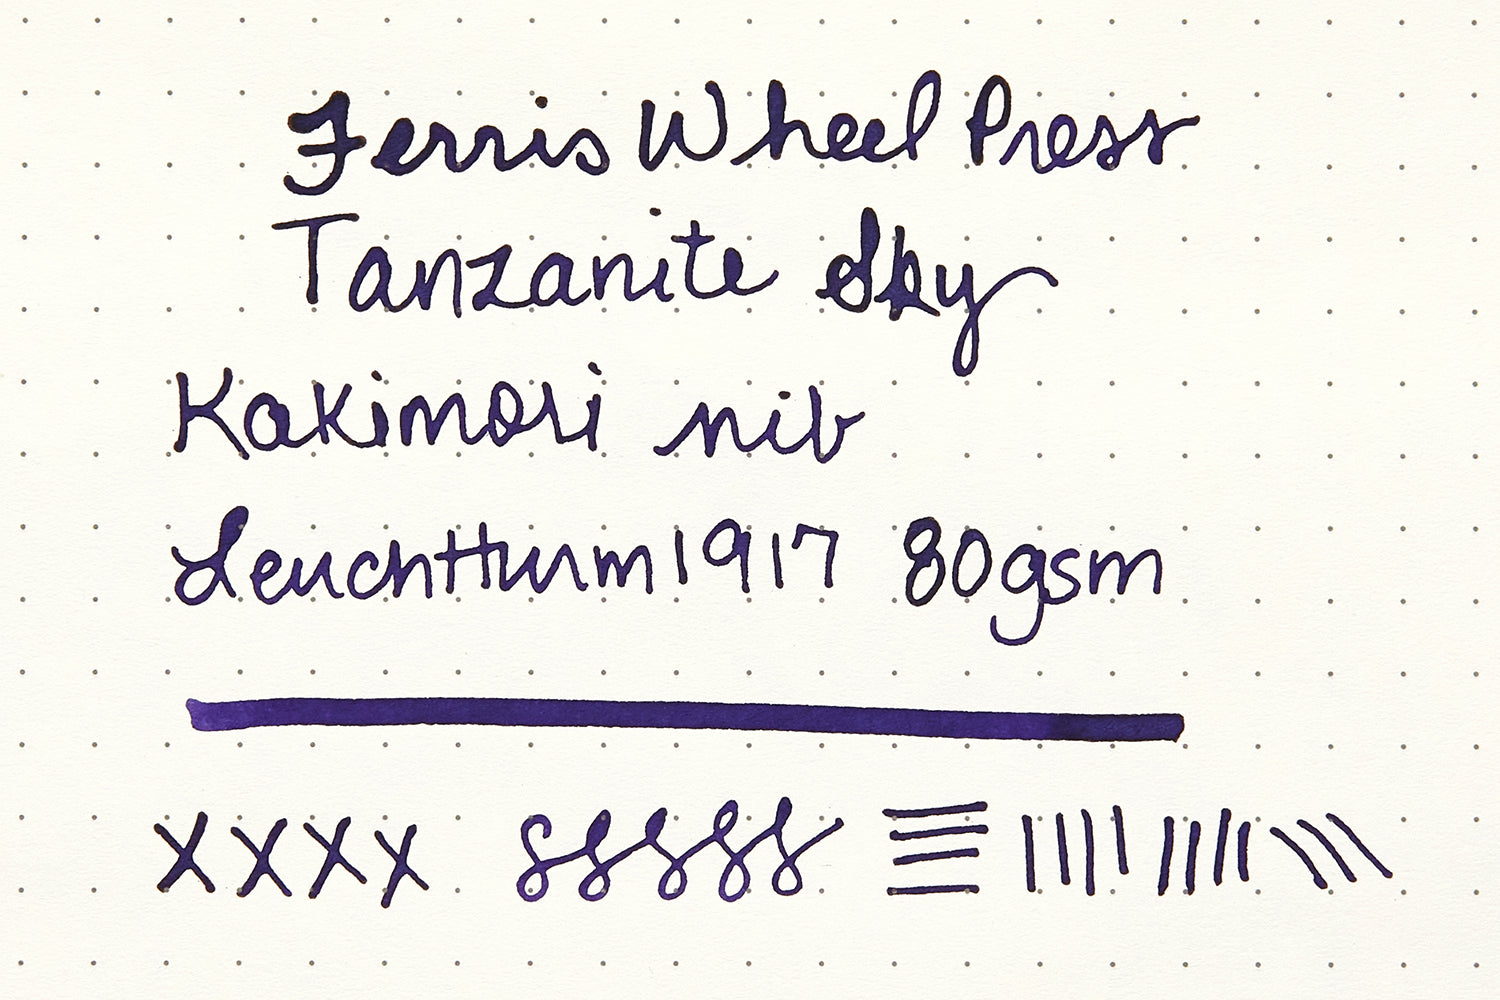 FWP Tanzanite Sky ink writing sample on cream colored dot grid paper